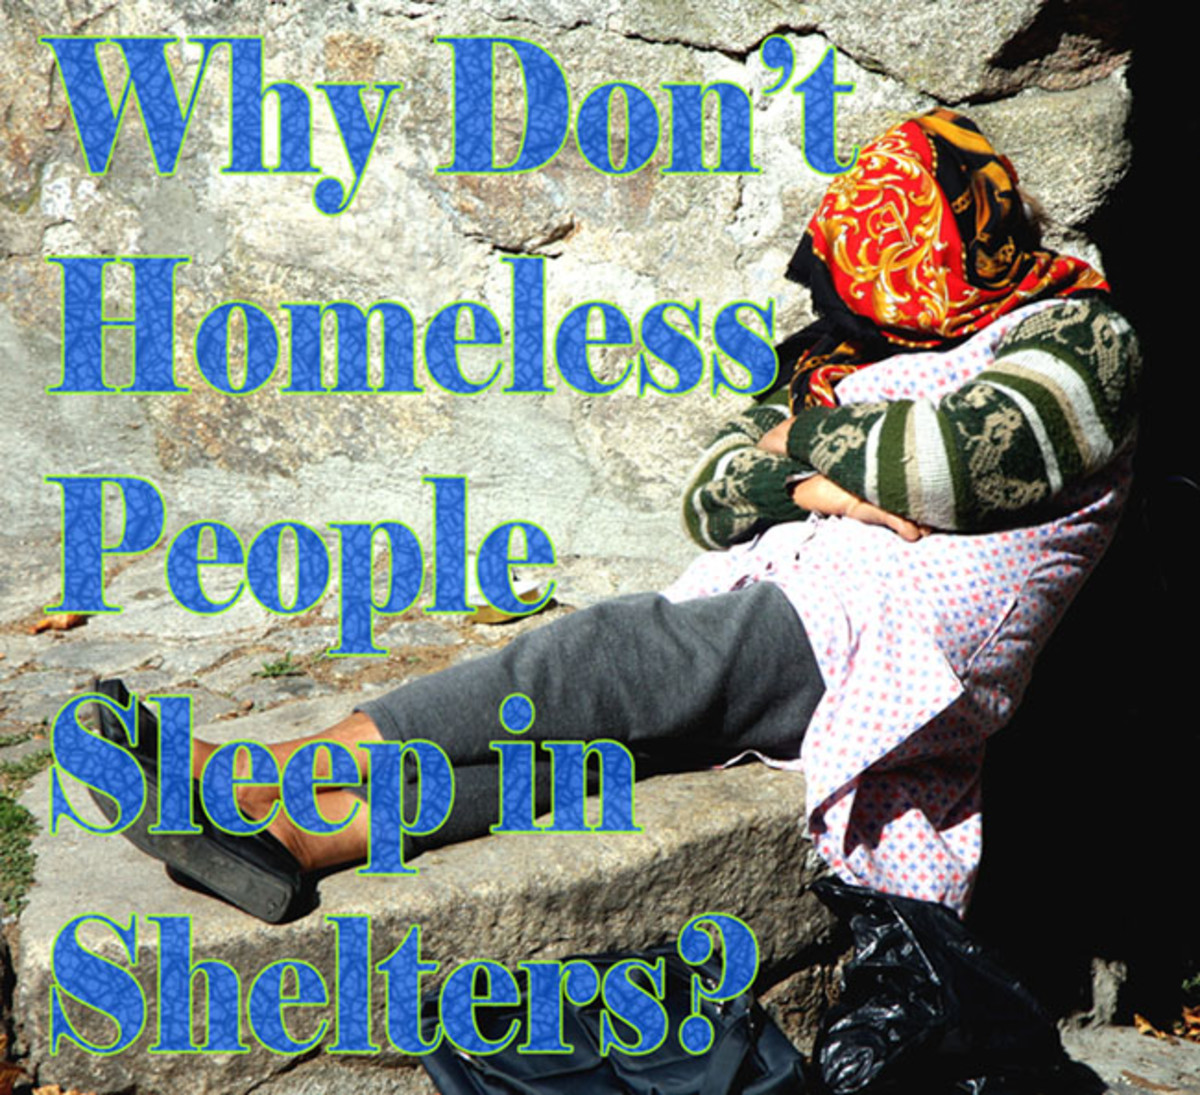 Why is shelter important?